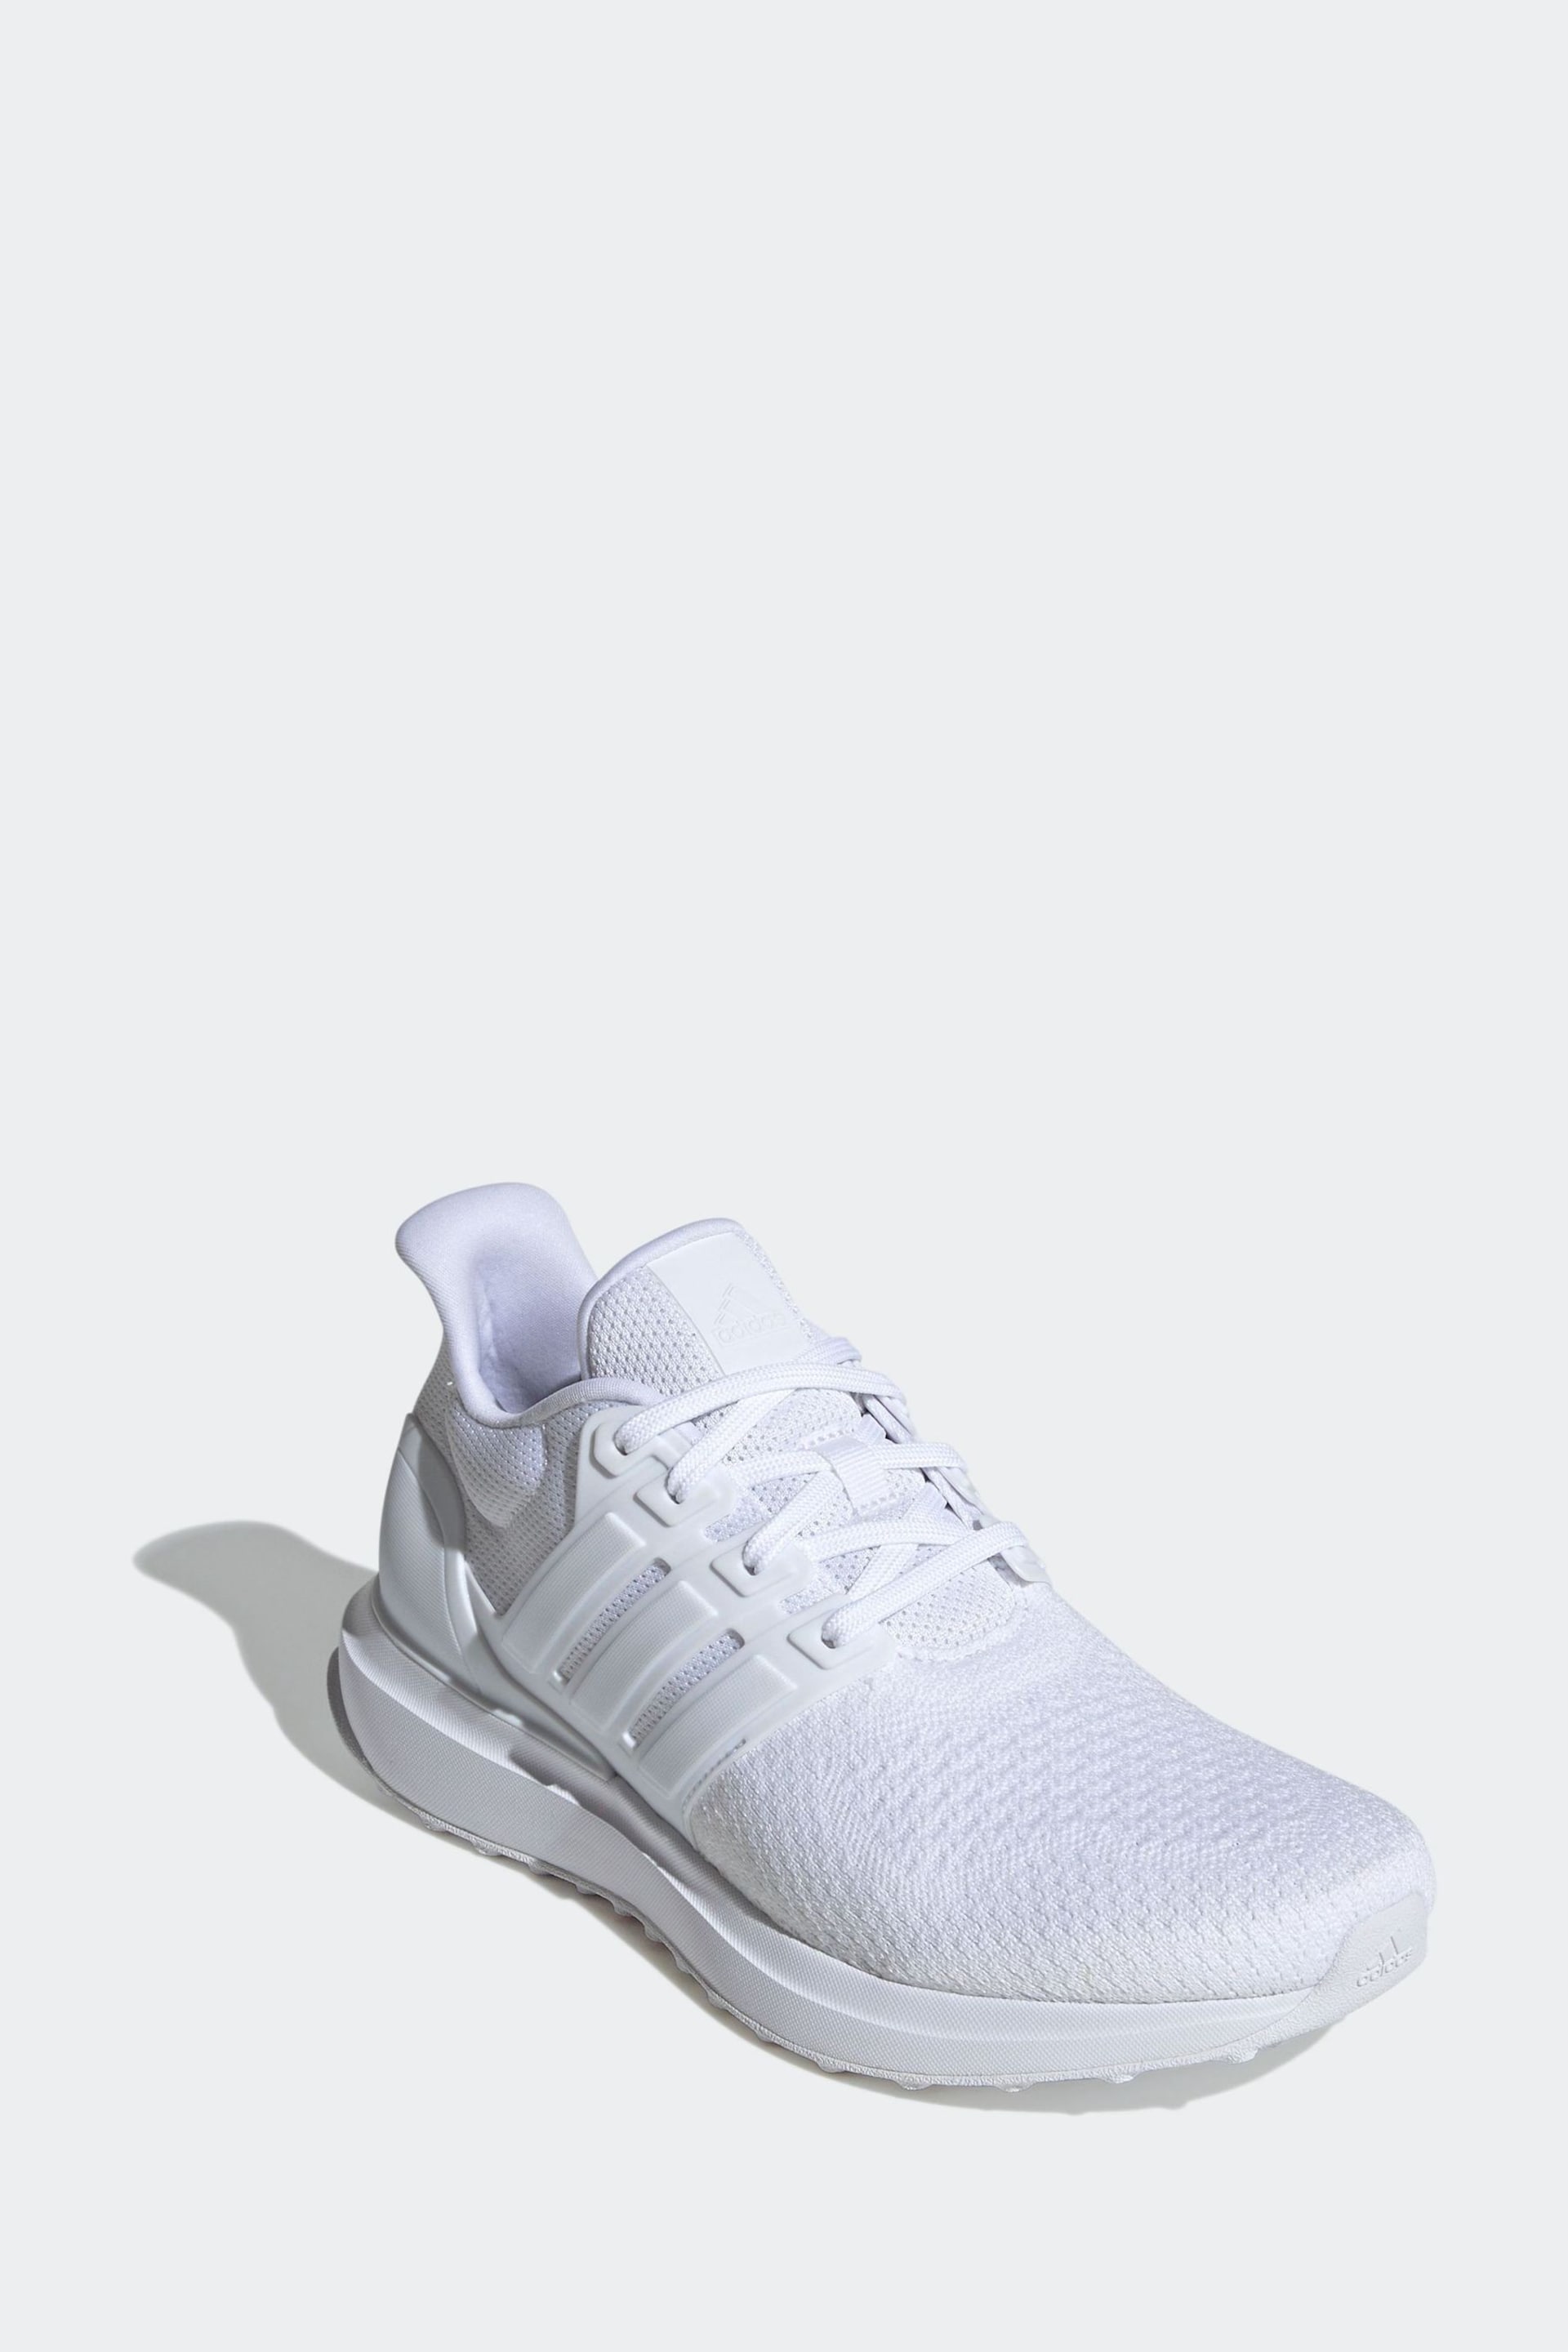 adidas White UBounce DNA Trainers - Image 4 of 10